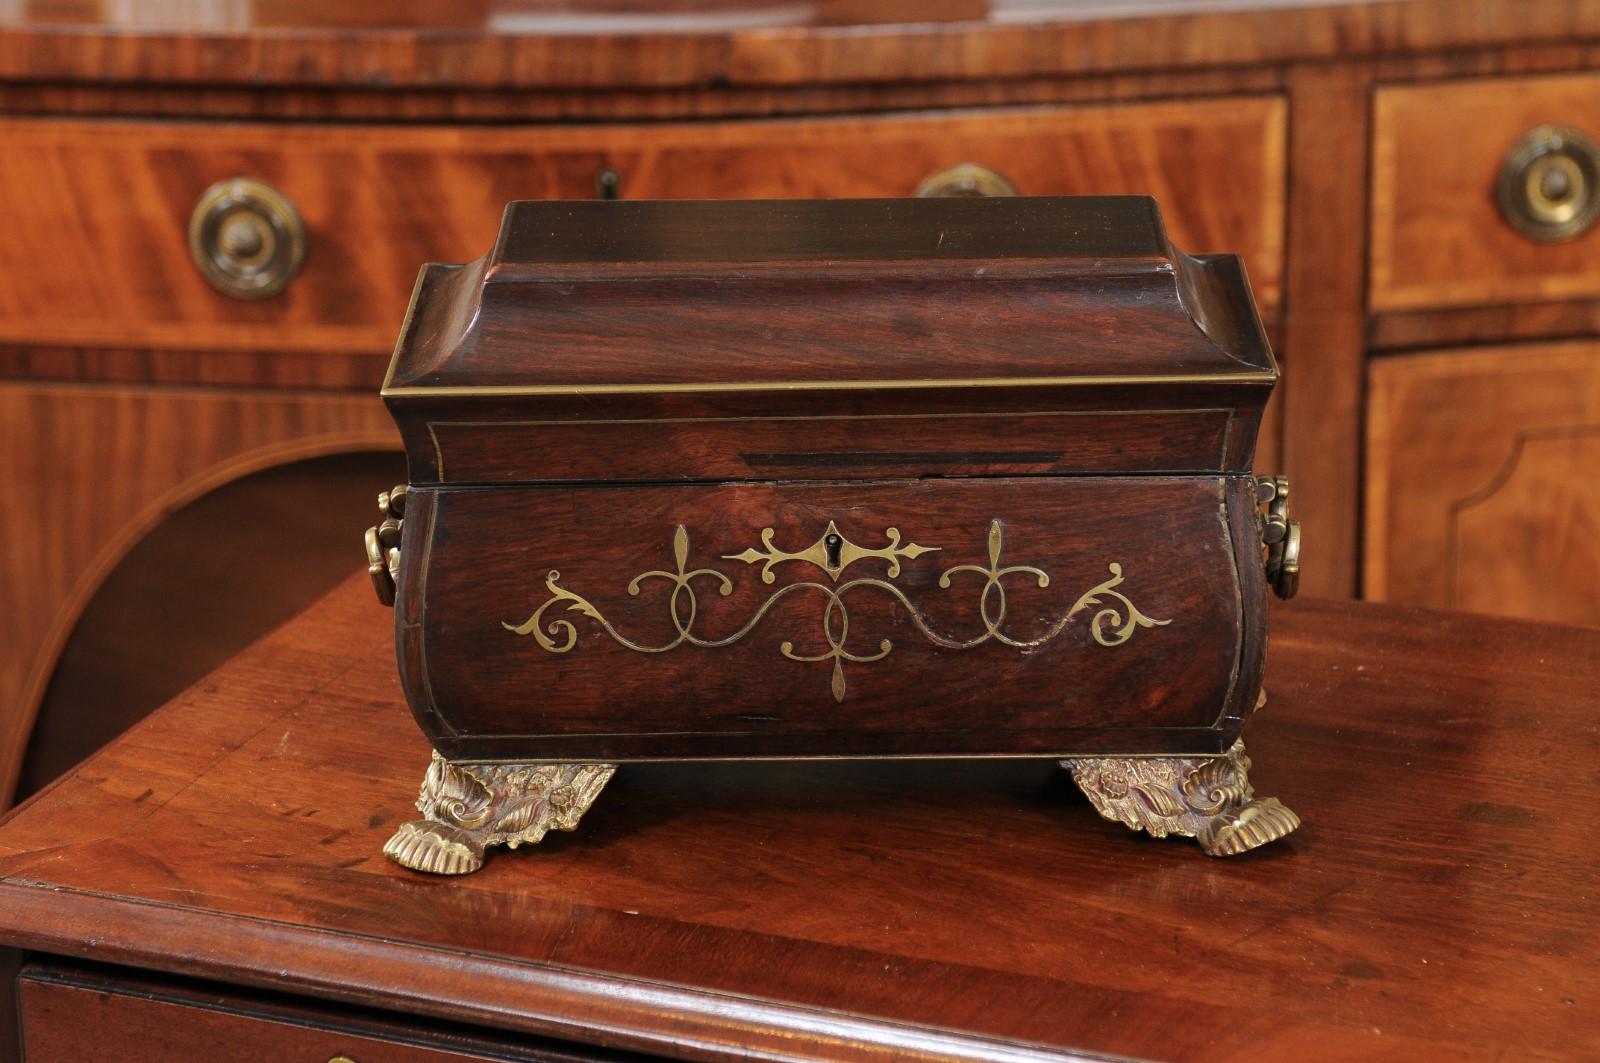 Regency Pagoda Form Work Box with Brass Feet & Inlay, Early 19th Century England For Sale 9